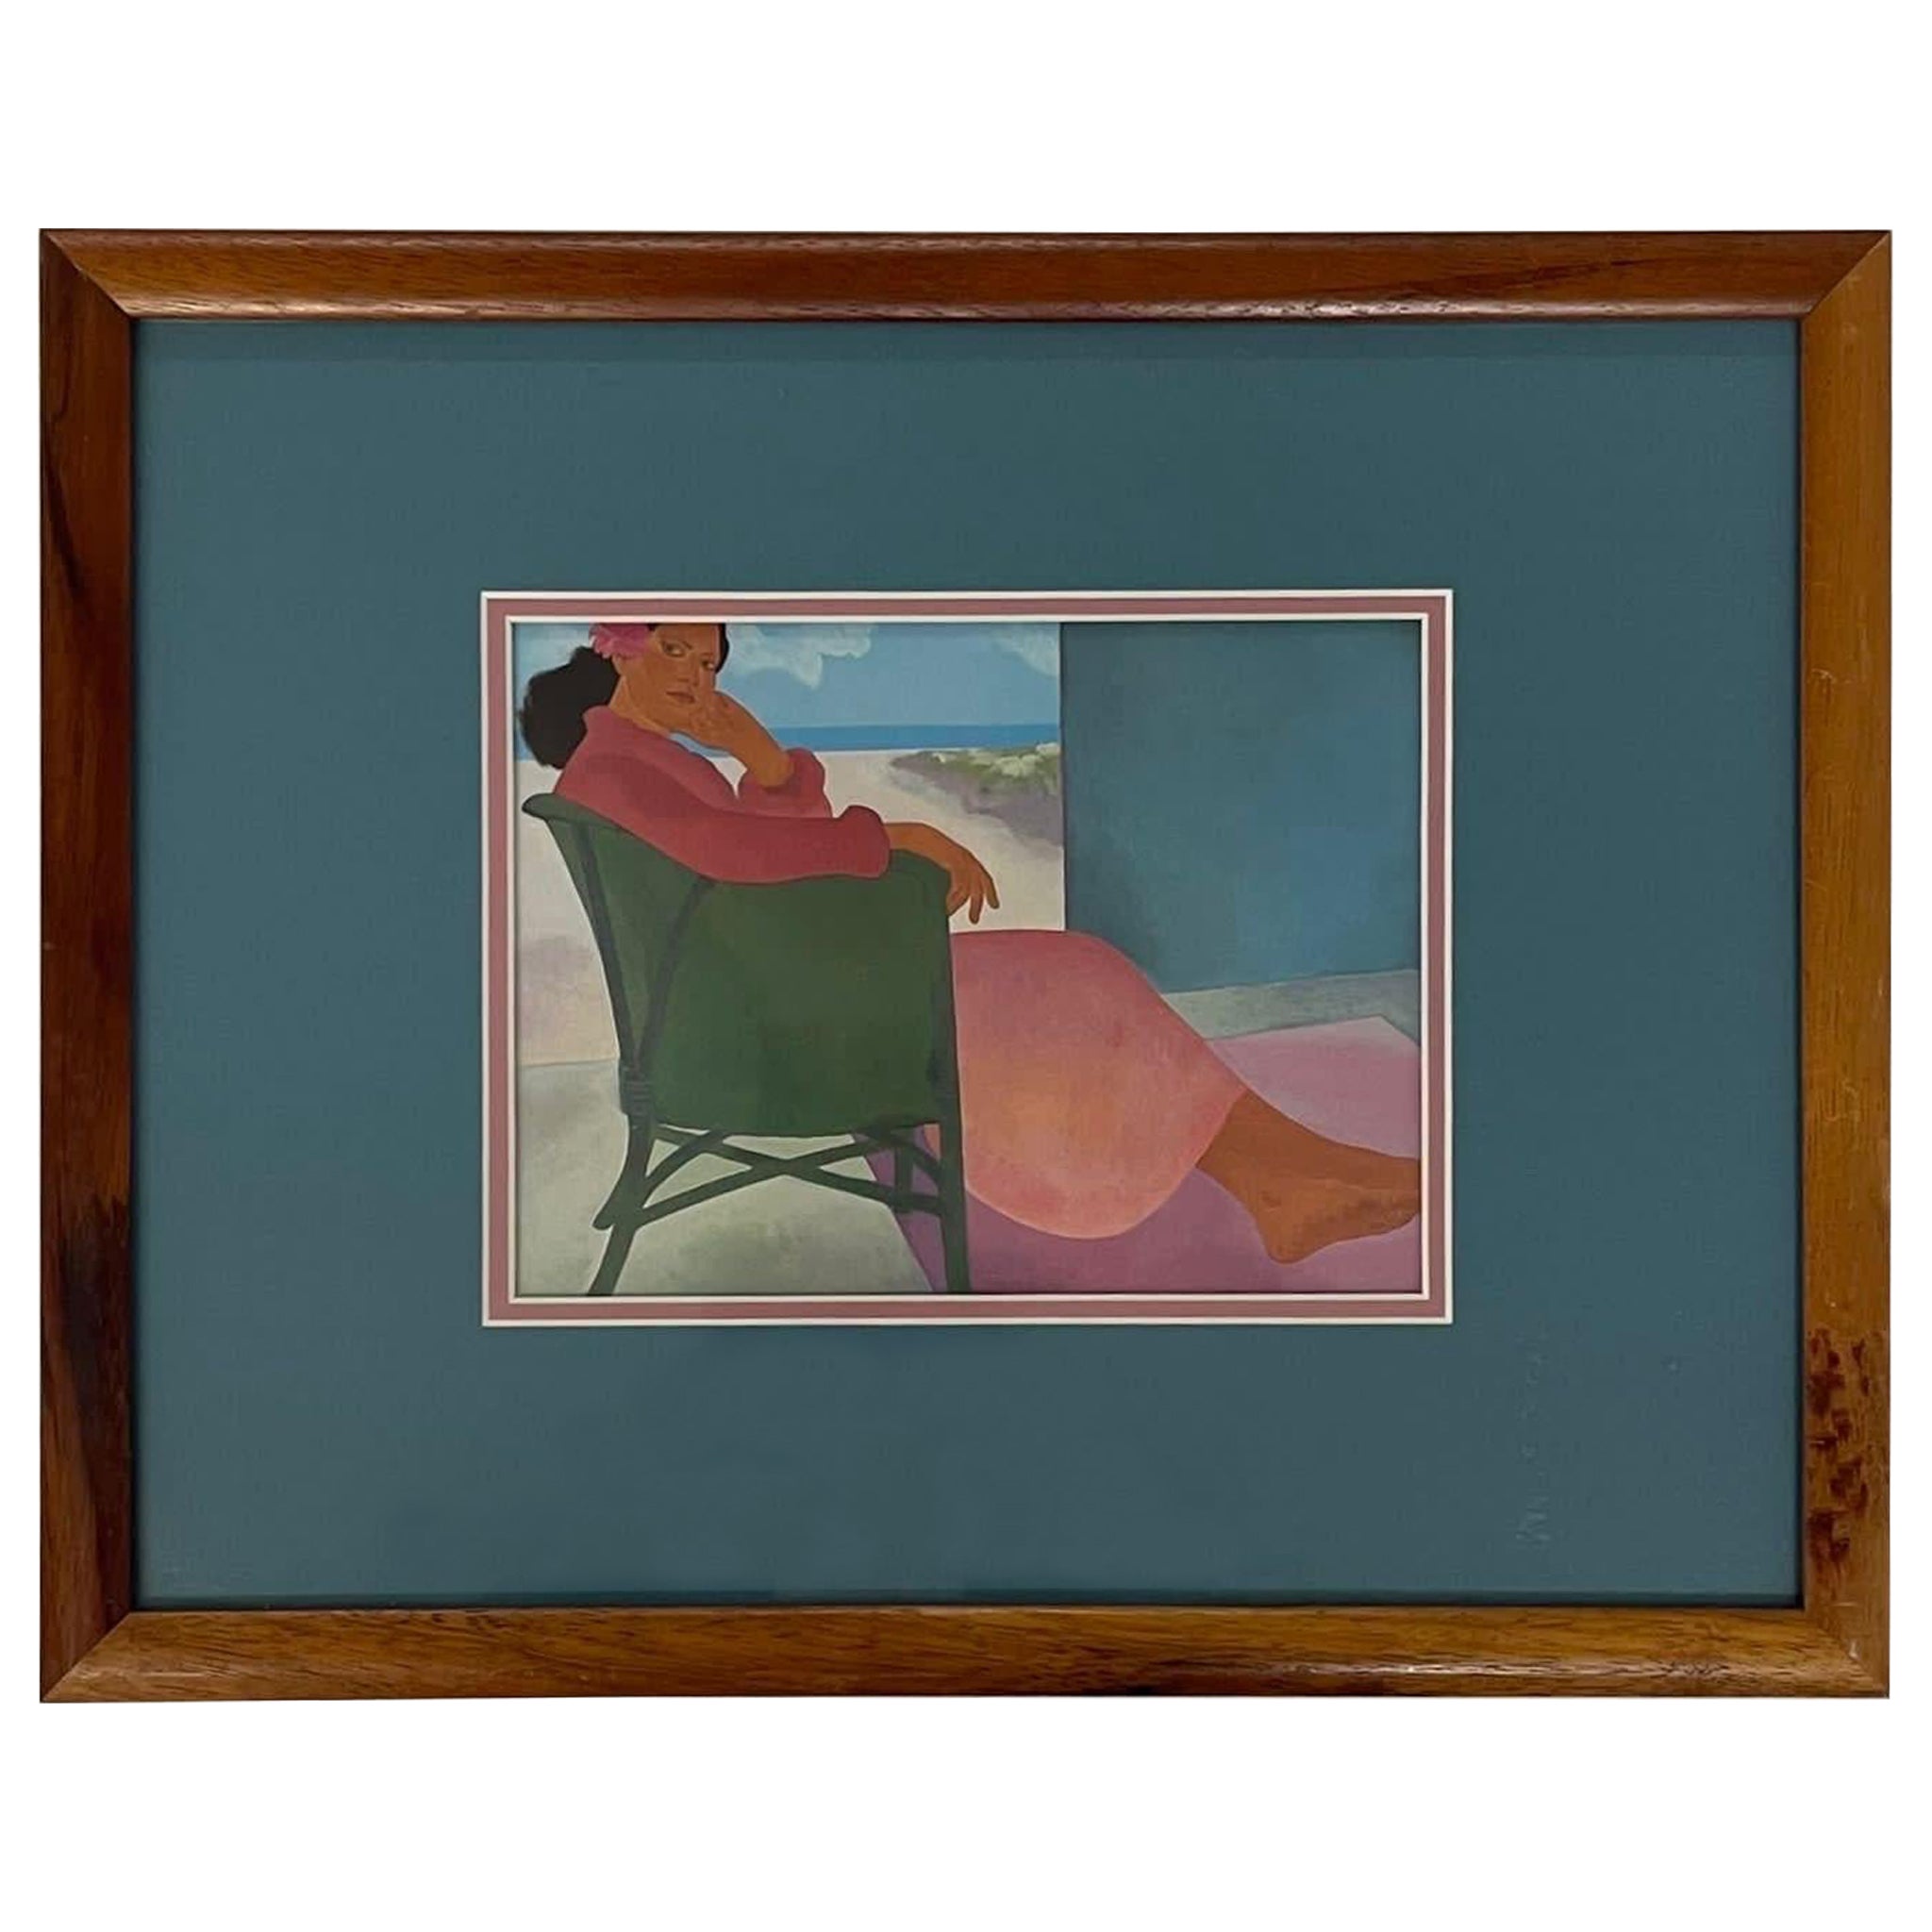 Vintage Wood Framed and Matted Print Titled “ Woman in Chair “ by Peggy Hopper.